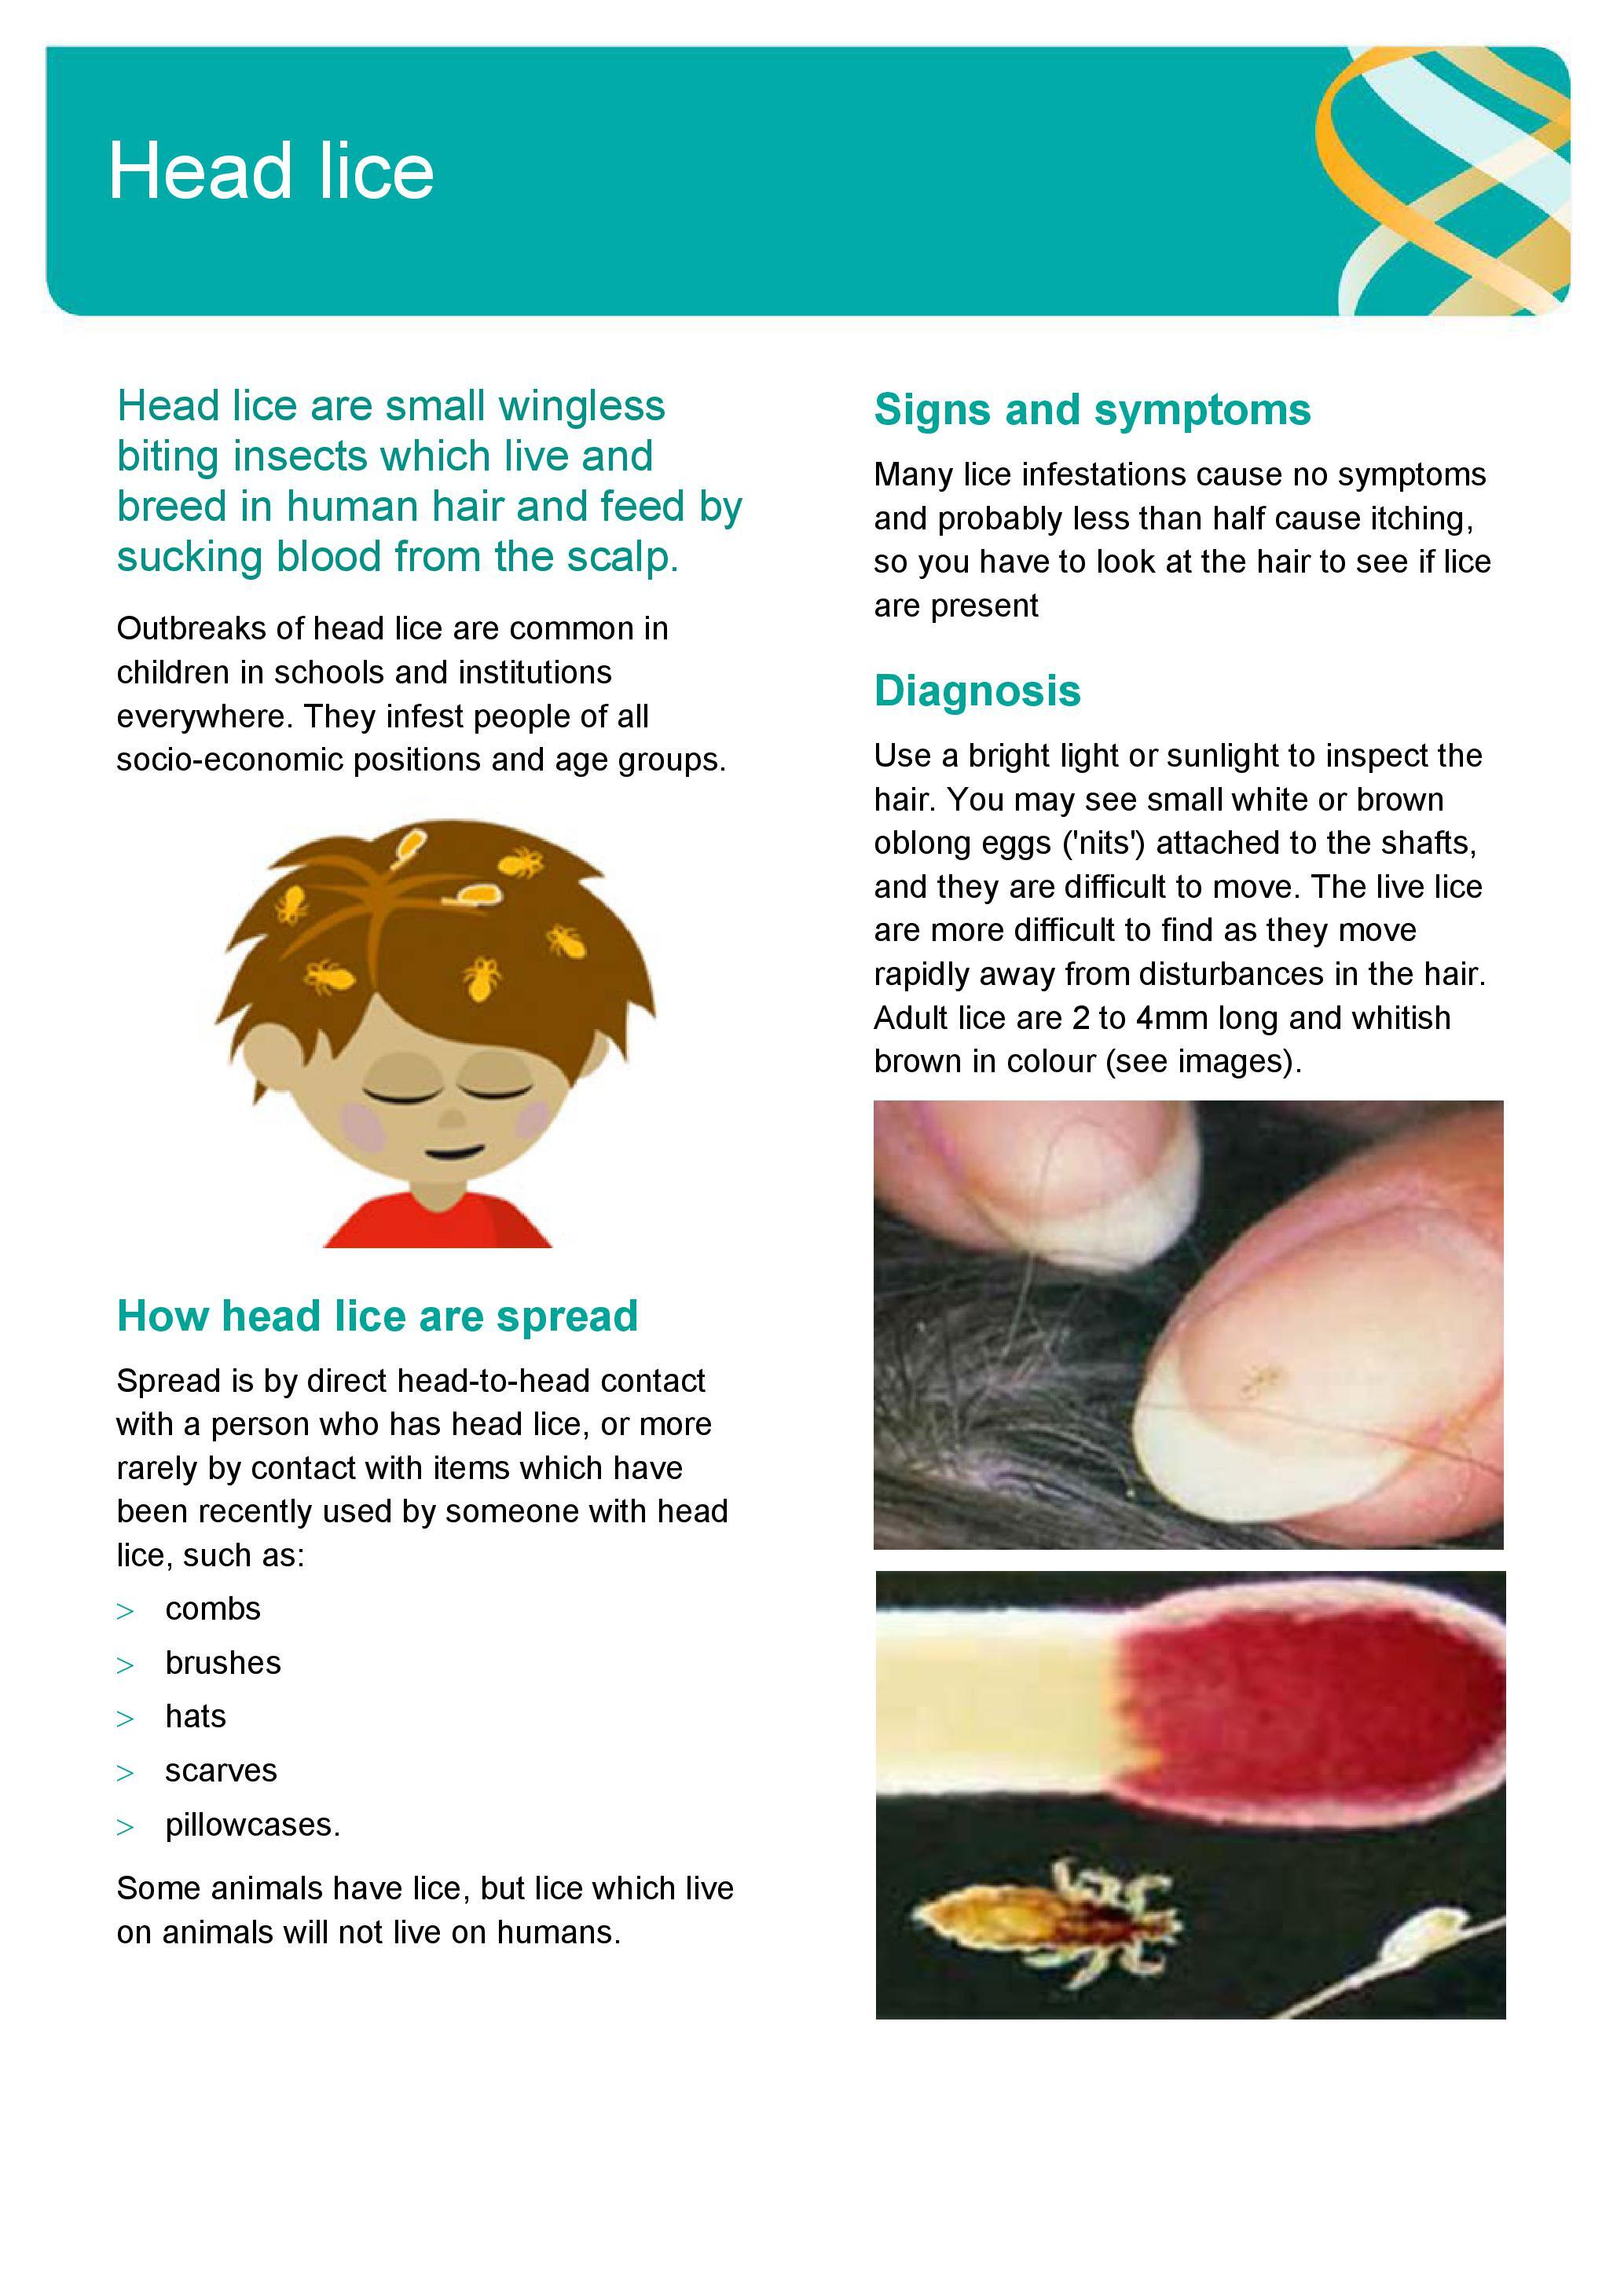 Head Lice Information (1)_Page_1